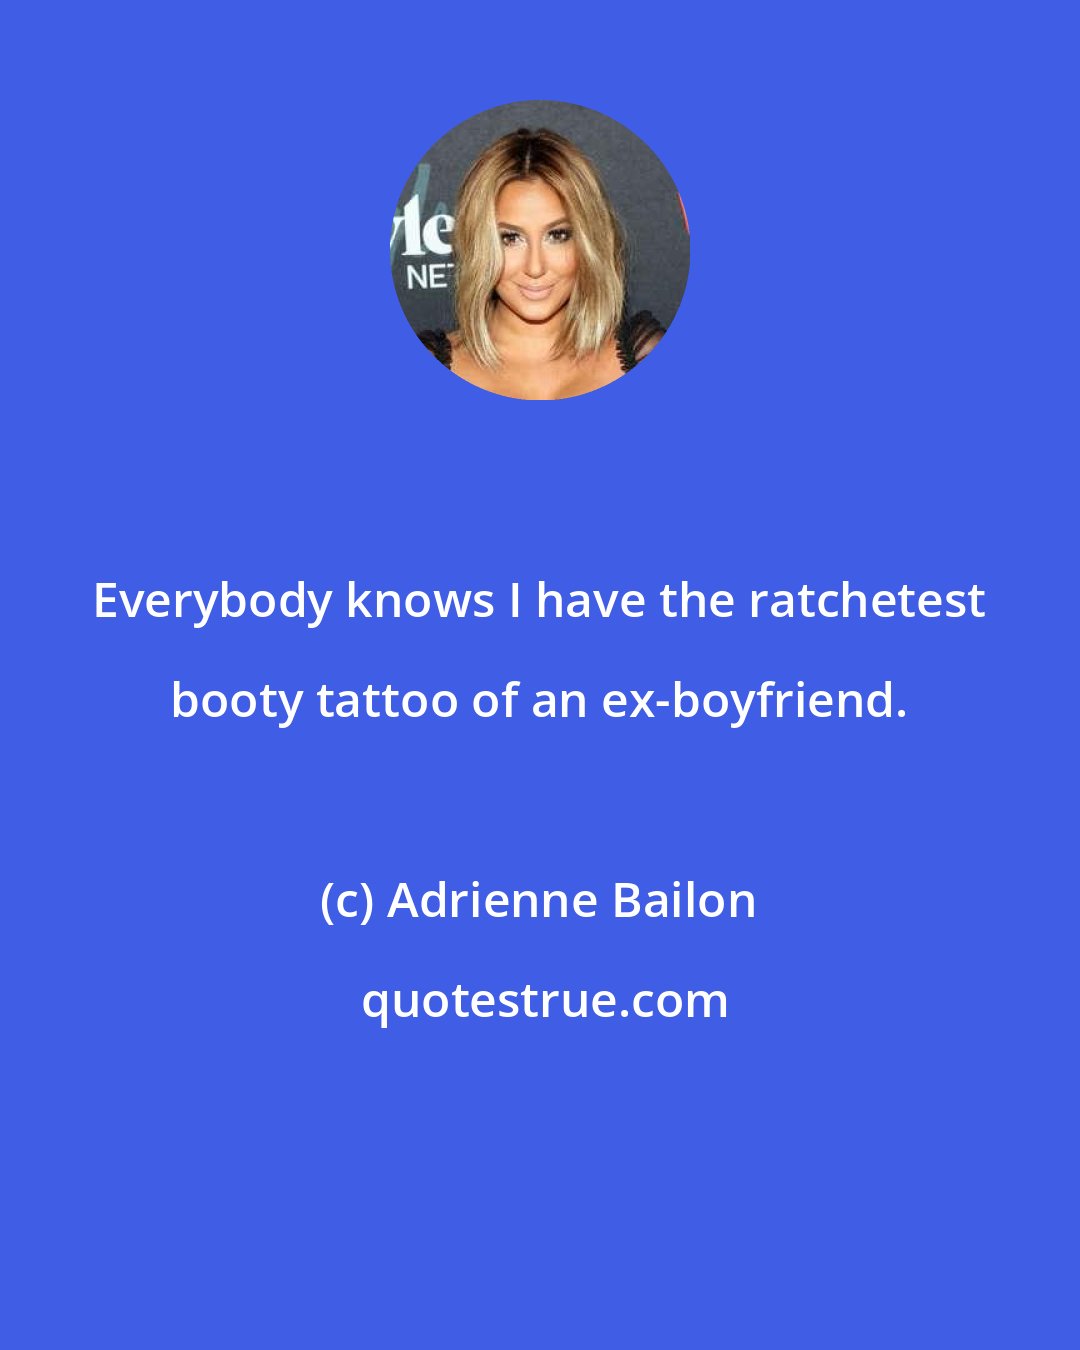 Adrienne Bailon: Everybody knows I have the ratchetest booty tattoo of an ex-boyfriend.